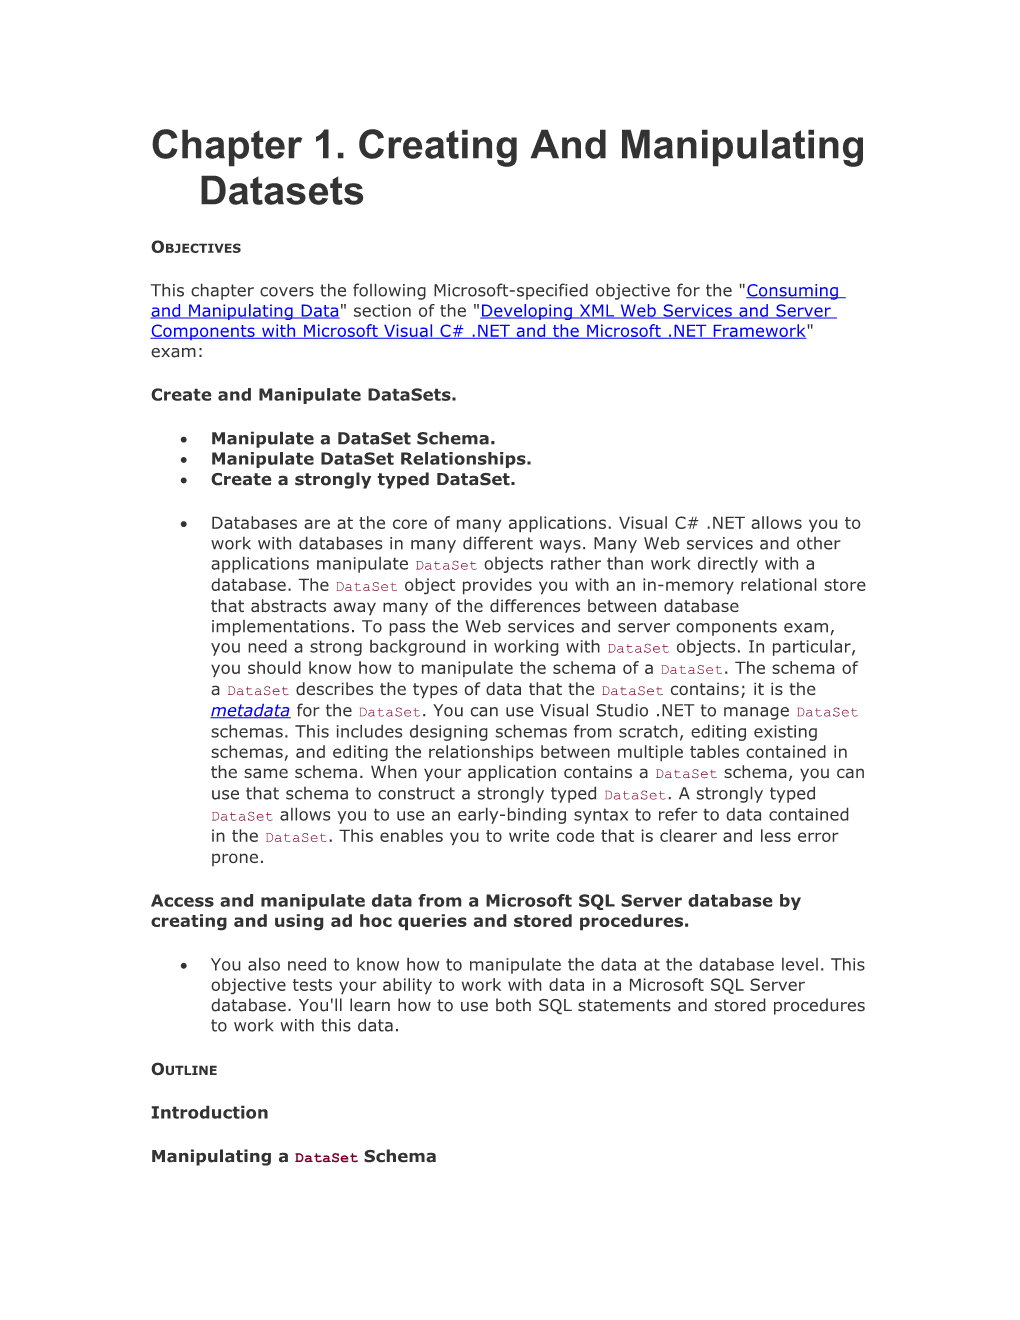 Chapter 1. Creating and Manipulating Datasets